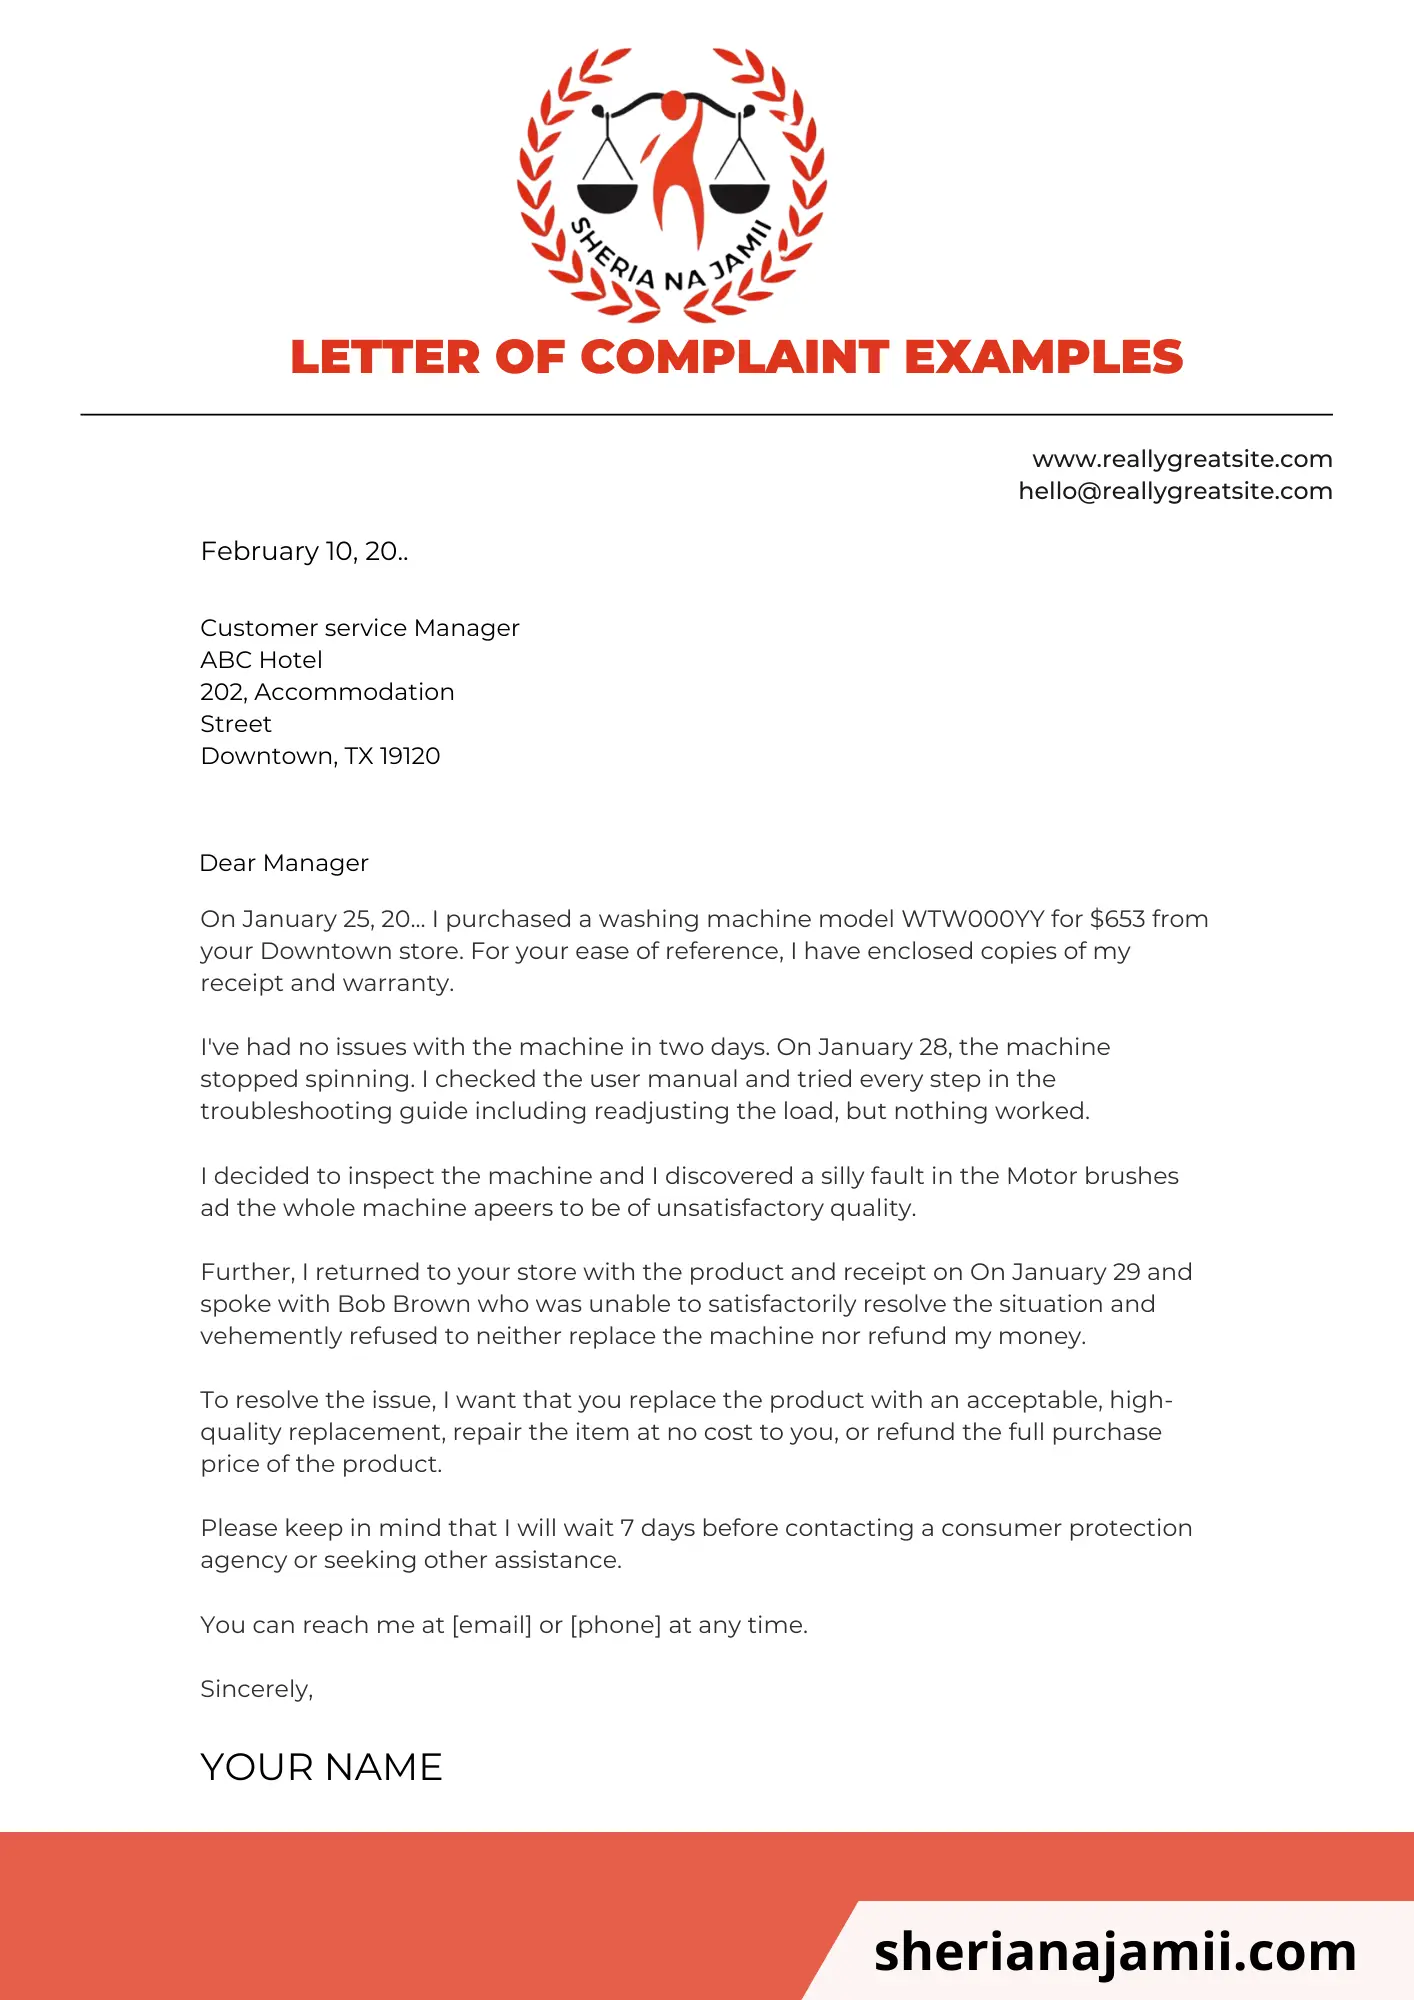 Letter of complaint examples